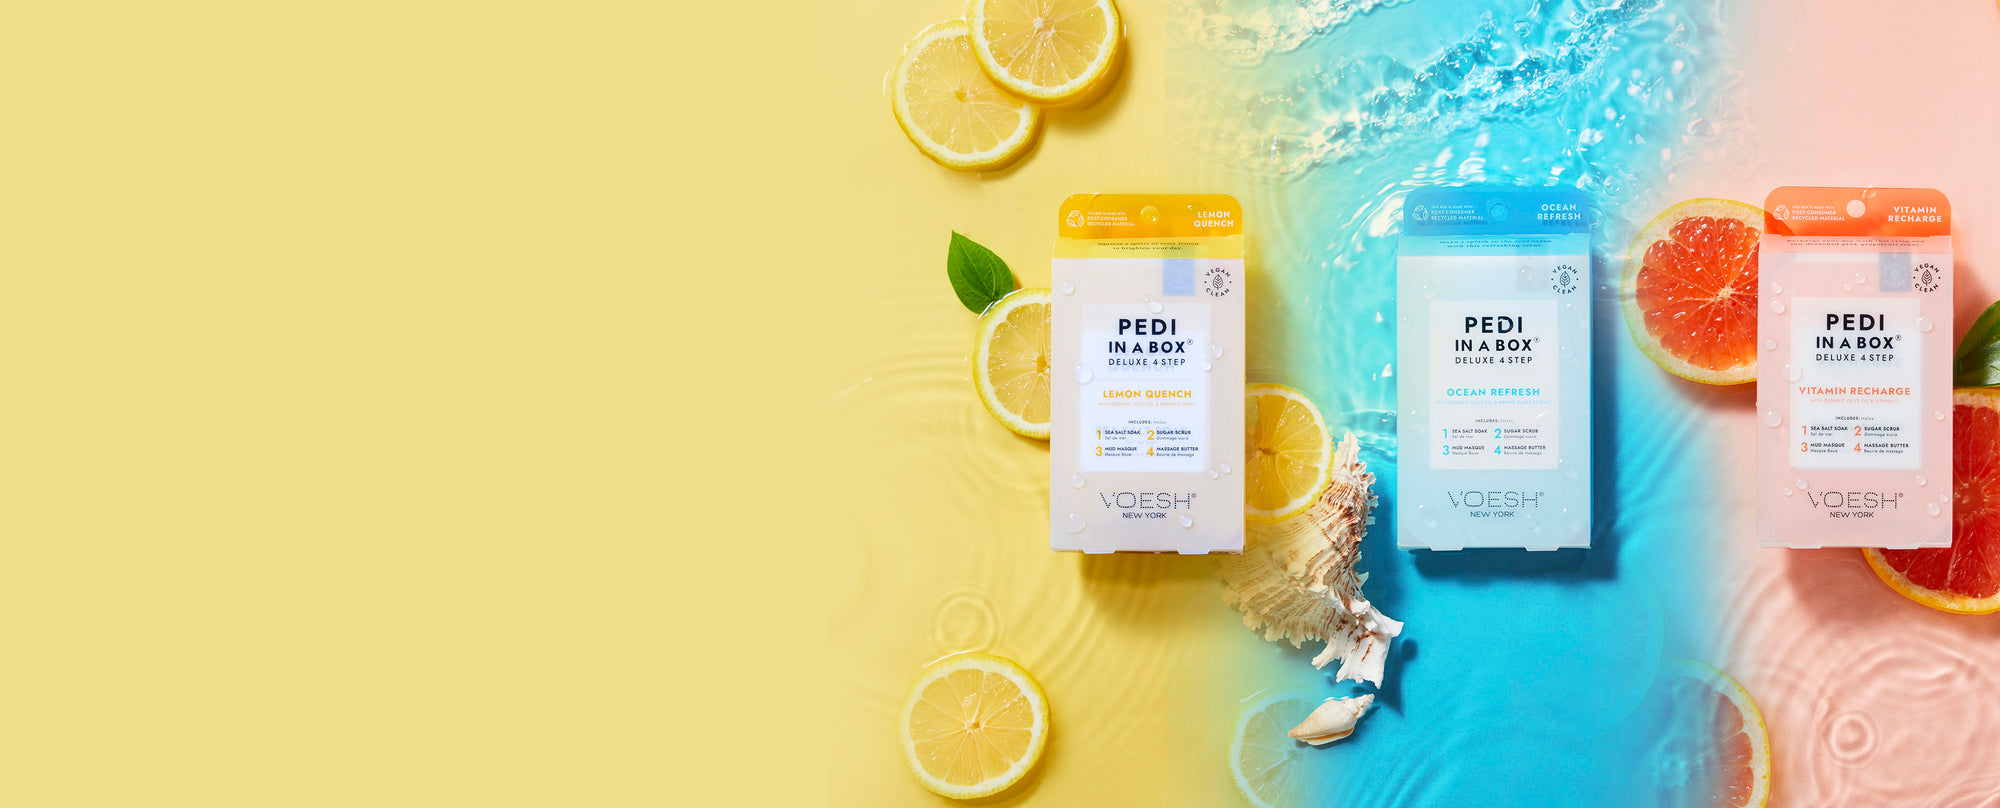 Lemon Quench, Ocean Refresh, and Vitamin Recharge Pedi in a Box Deluxe 4 Step kits next to lemon slices, seashells, and grapefruit slices on a yellow, blue, and orange water background.